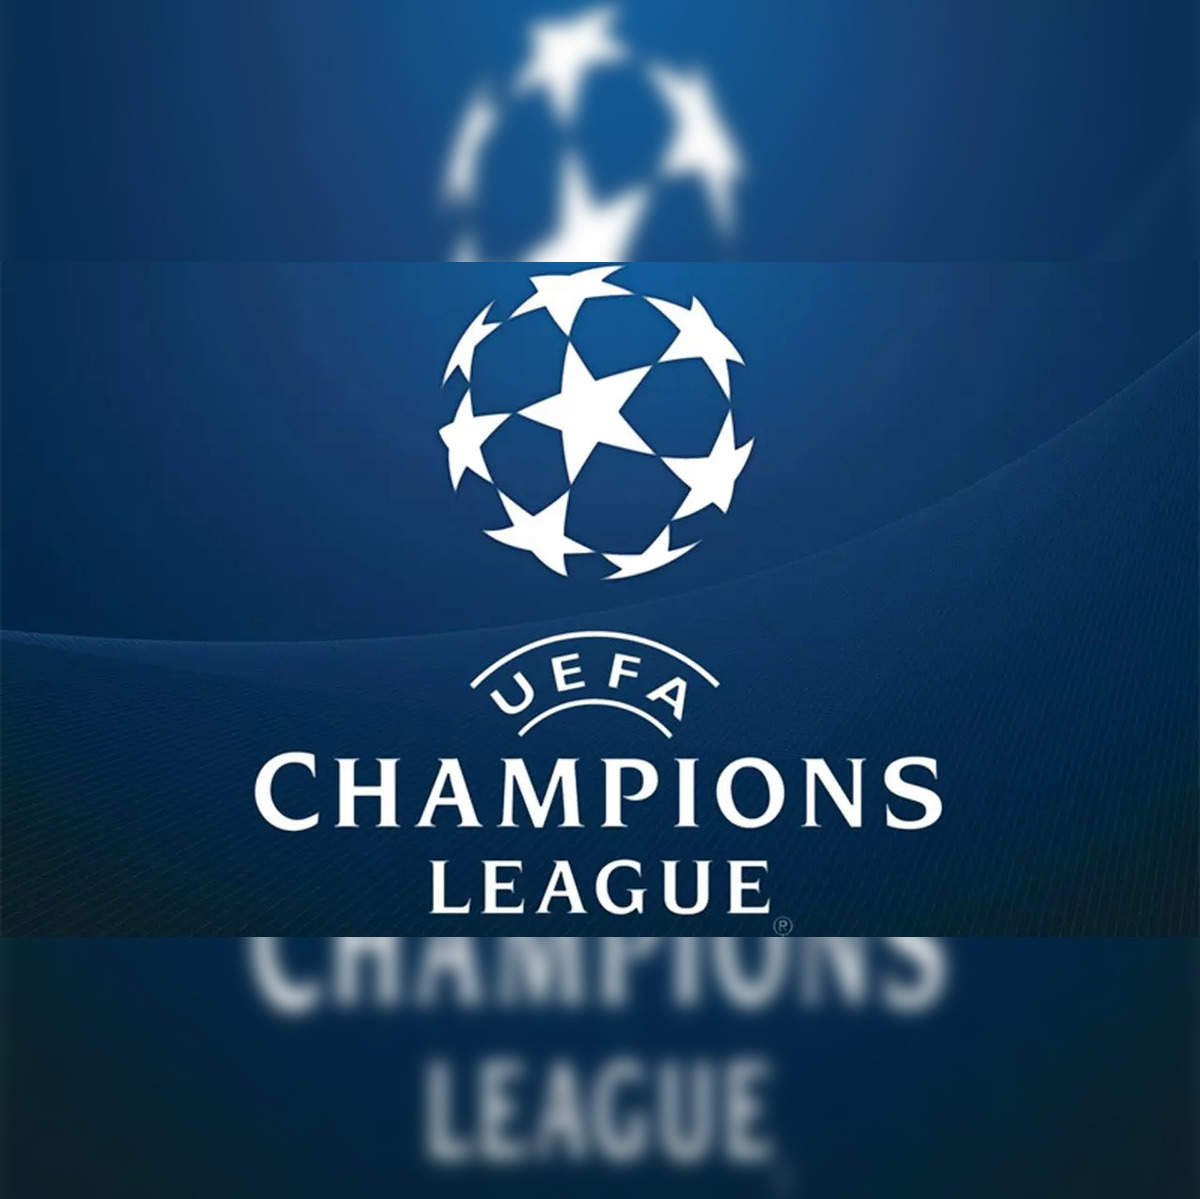 UEFA confirm dates, kick-off times for Champions League group